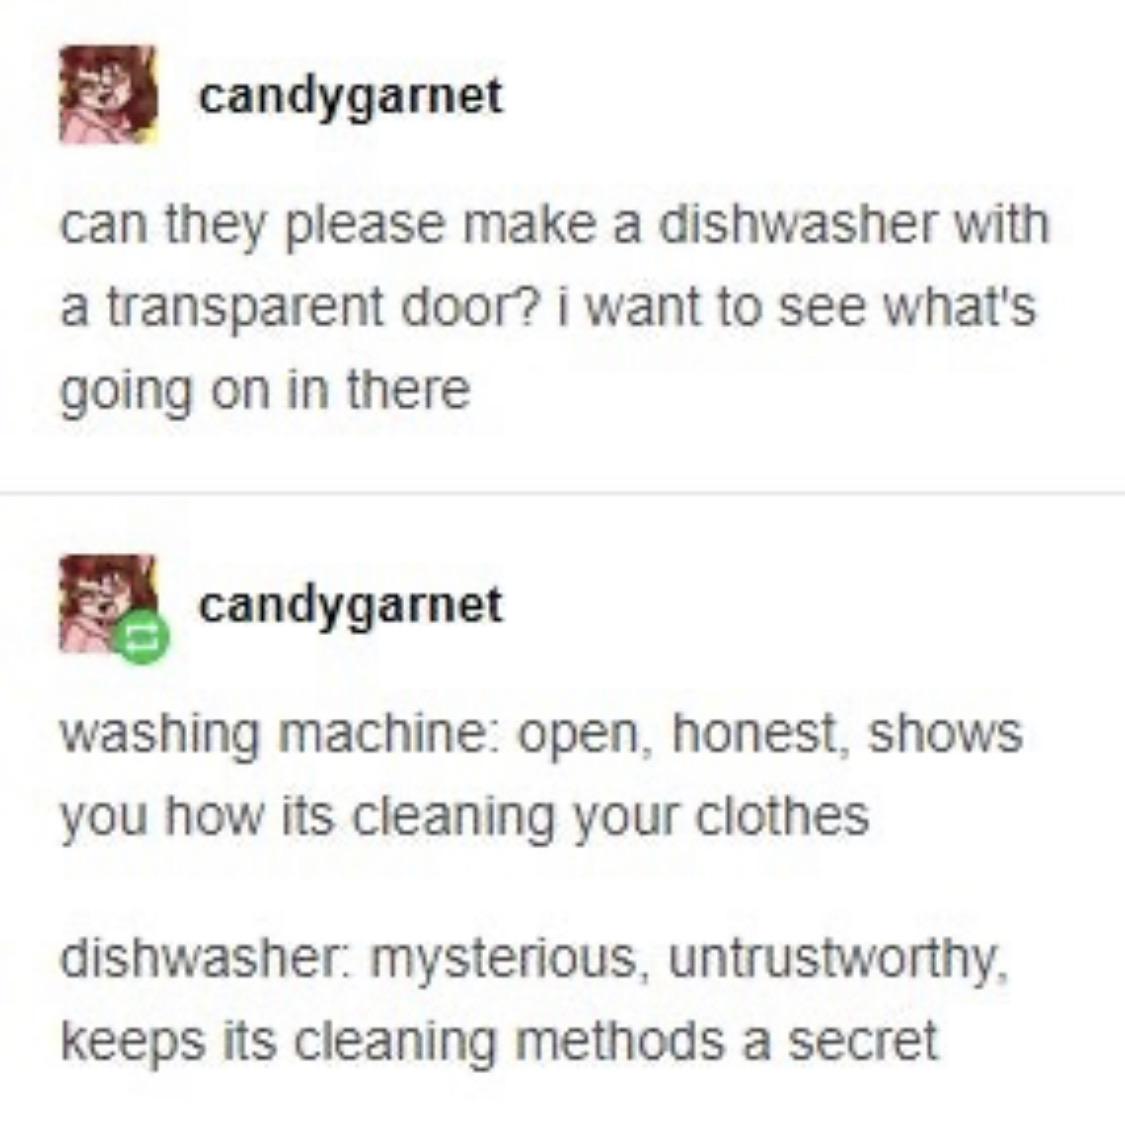 can they please make a dishwasher - candygarnet can they please make a dishwasher with a transparent door? i want to see what's going on in there candygarnet washing machine open, honest, shows you how its cleaning your clothes dishwasher mysterious, untr